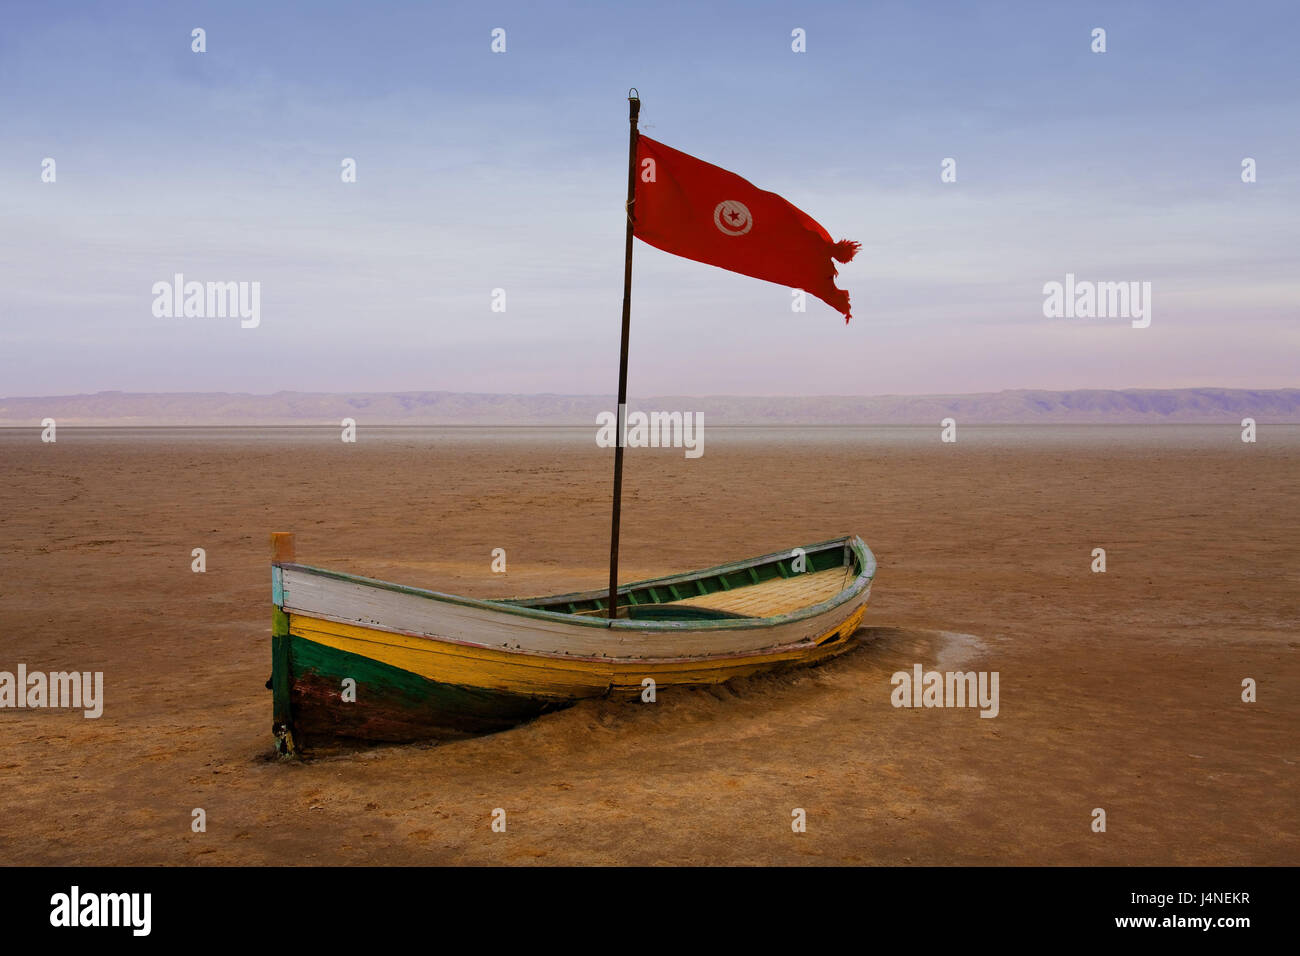 Tunisia, Chott el Djerid, salt lake, parched, boat, North Africa, scenery, nature, dryness, dryness, wooden boot, masts, flag, wind, blow, exit, nobody, loneliness, seclusion, Stock Photo